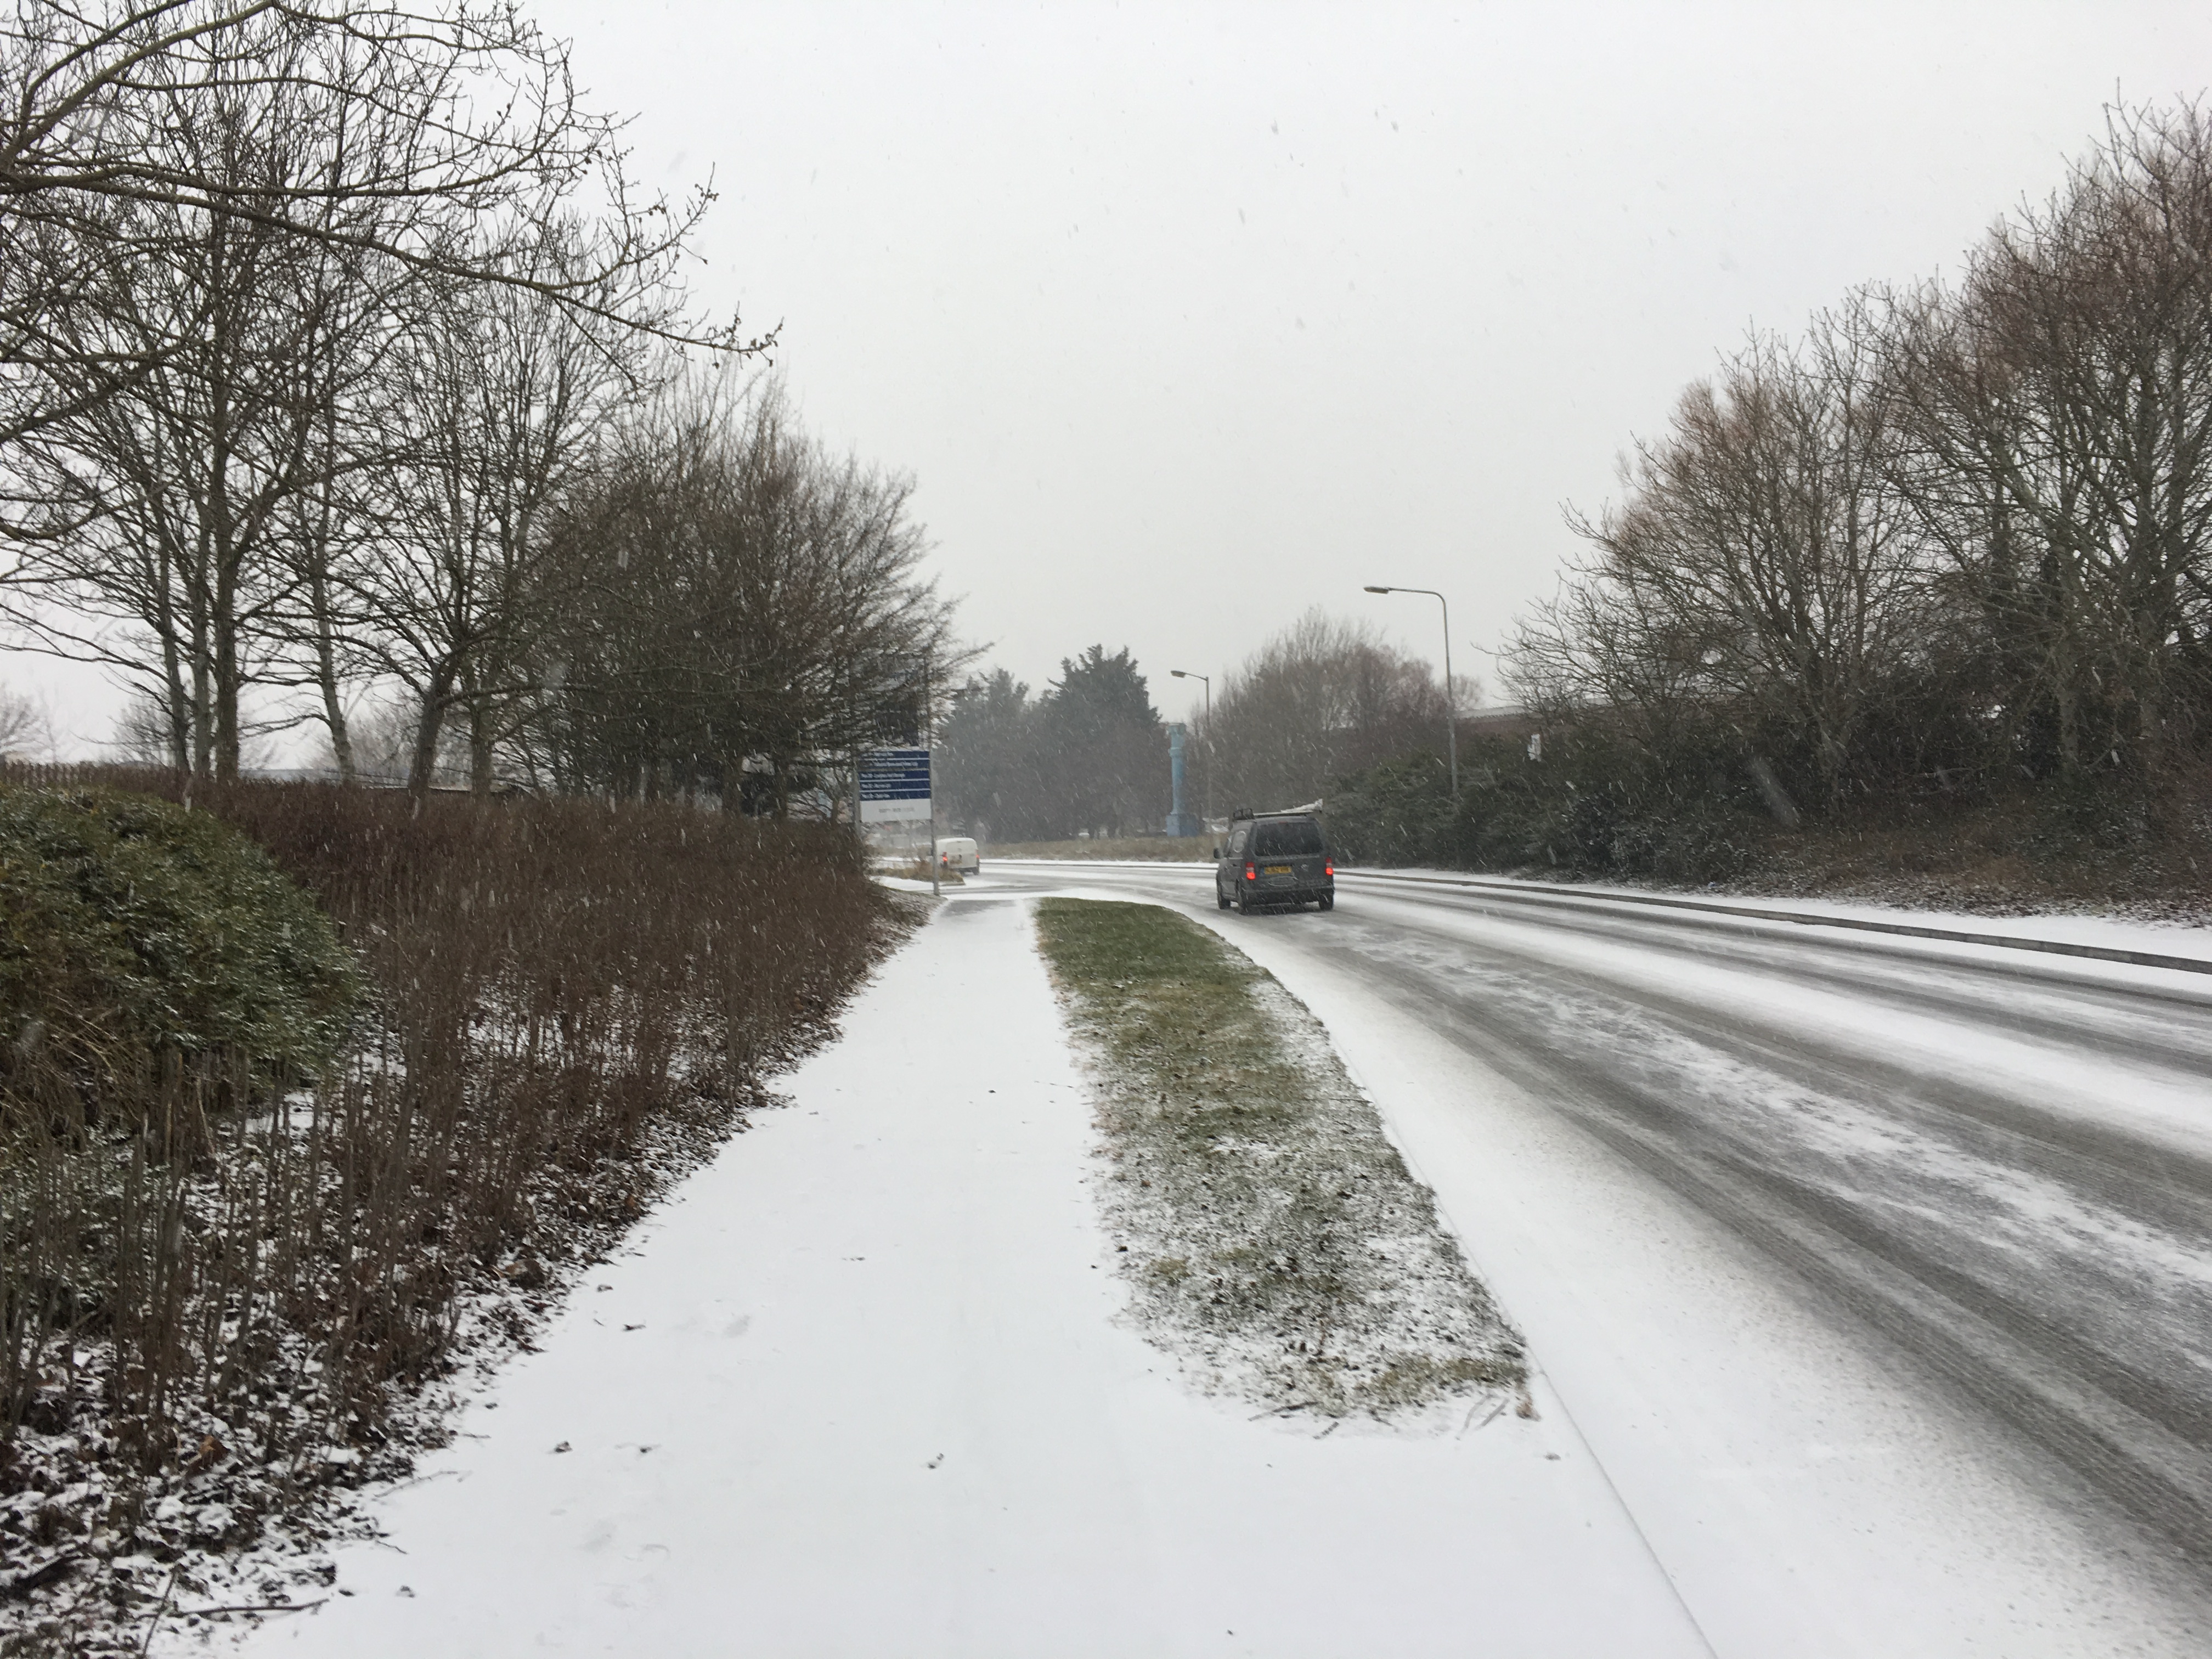 There's a pathway on the left that is completely covered in snow. On the right is a road which has snow on it and lines where cars have been driving. There is visible flakes of snow in the air